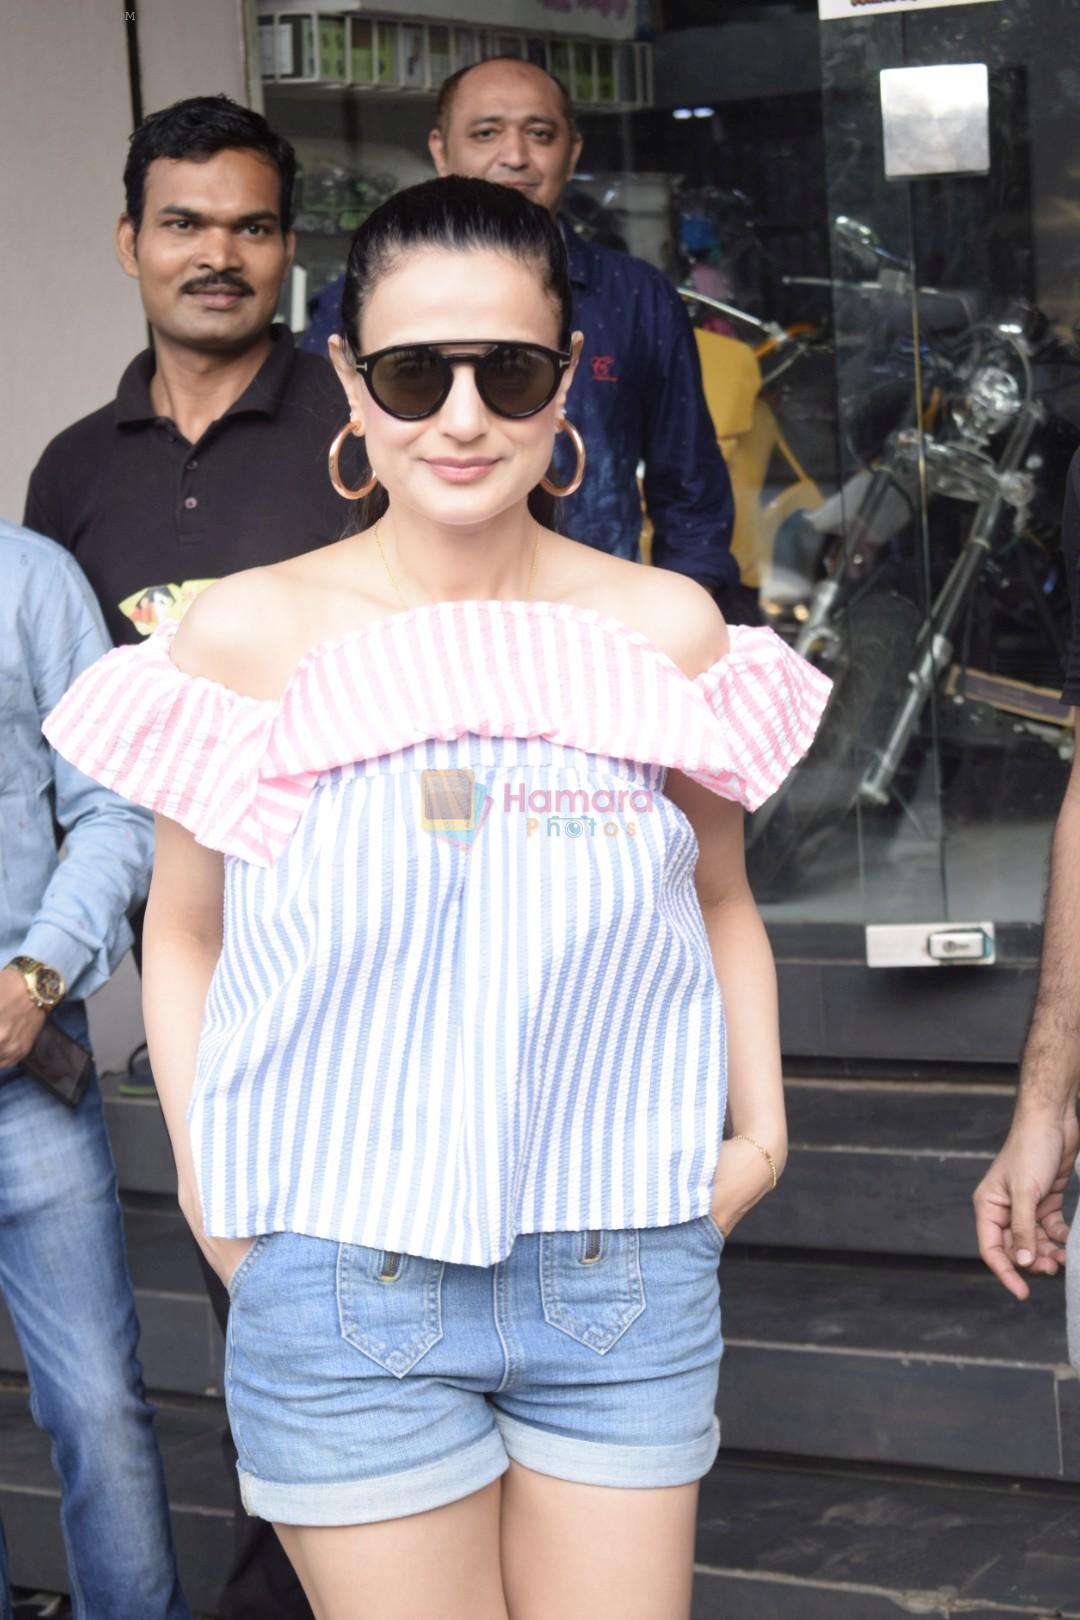 Ameesha Patel Spotted At Riders Cycle Store In Andheri on 3rd Oct 2018